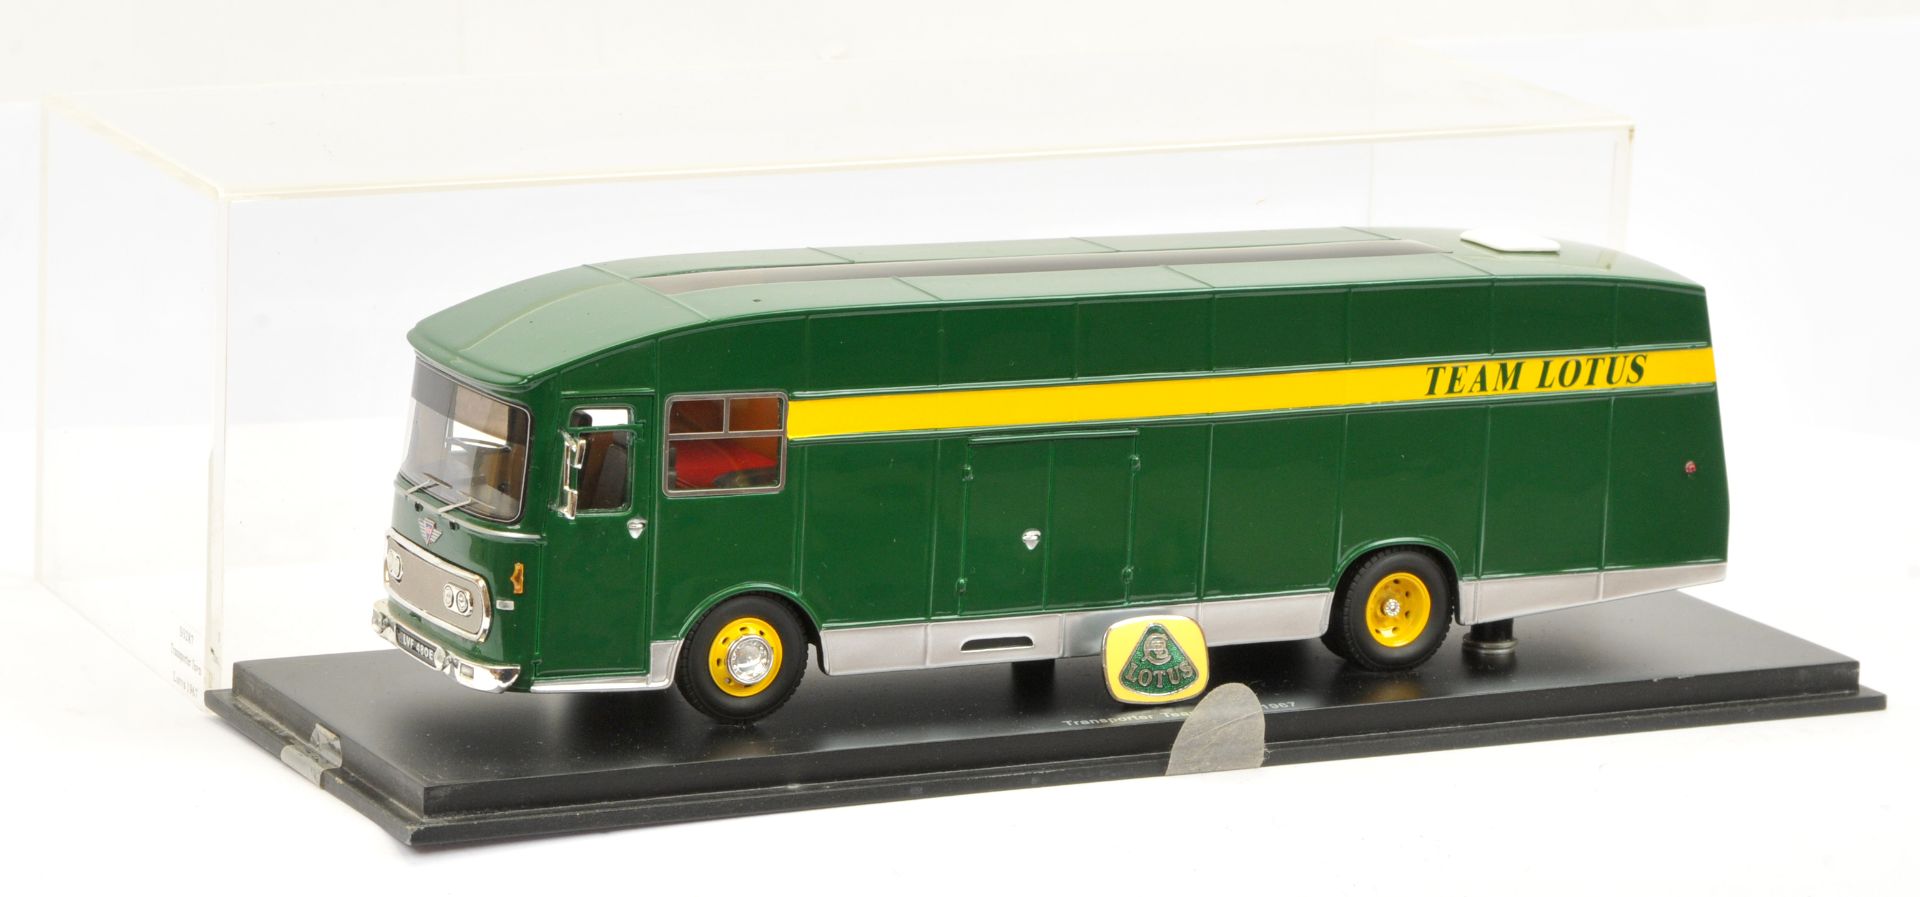 Spark S0287 1/43rd scale 1967 Lotus Team Transporter "Team Lotus" - green, yellow, silver, yellow...